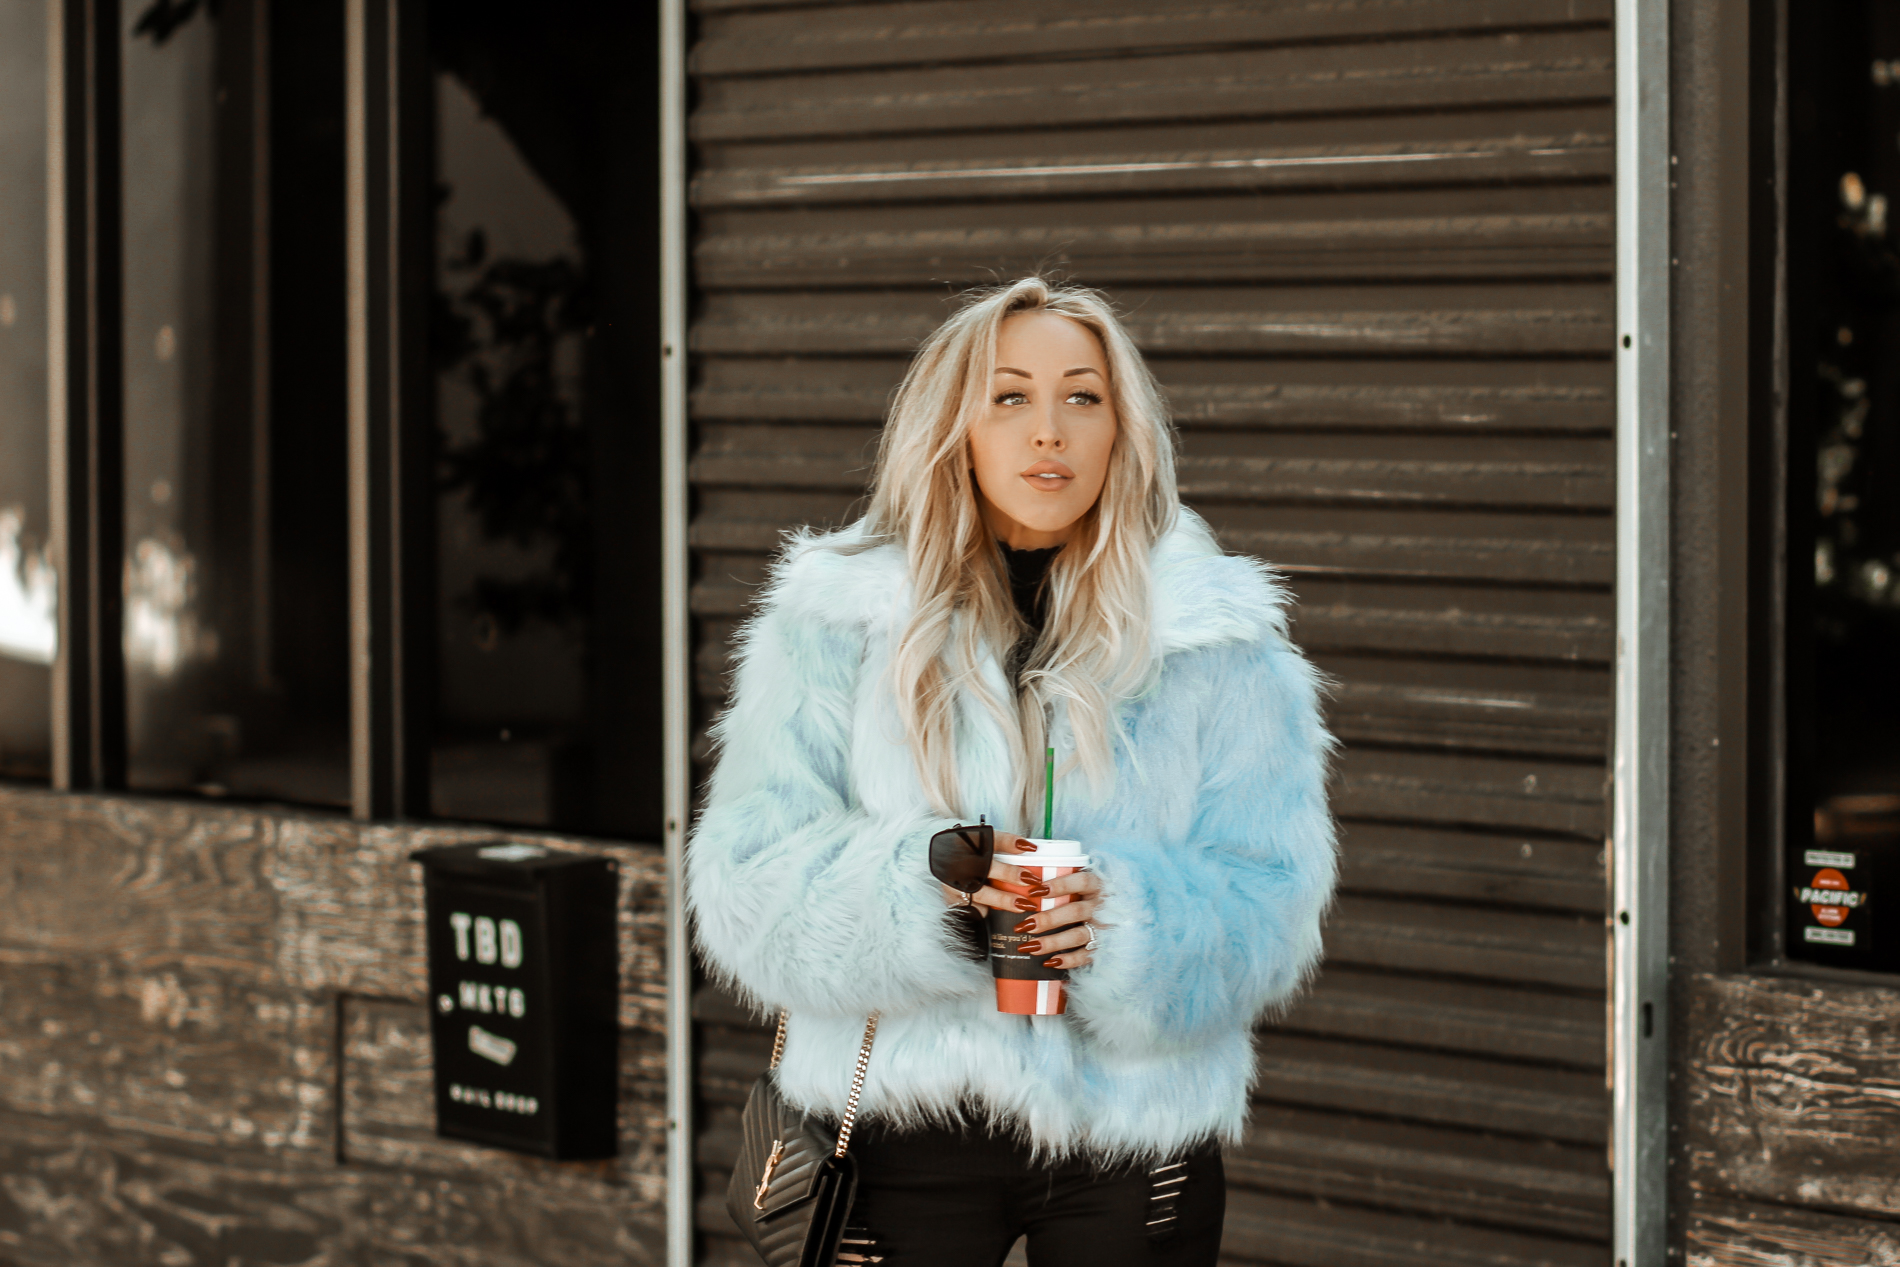 Light Blue Faux Fur Coat | Pastel Coat | Winter Fashion | Fall Fashion | Long Blonde Hair | Hair Extensions | Blondie in the City by Hayley Larue